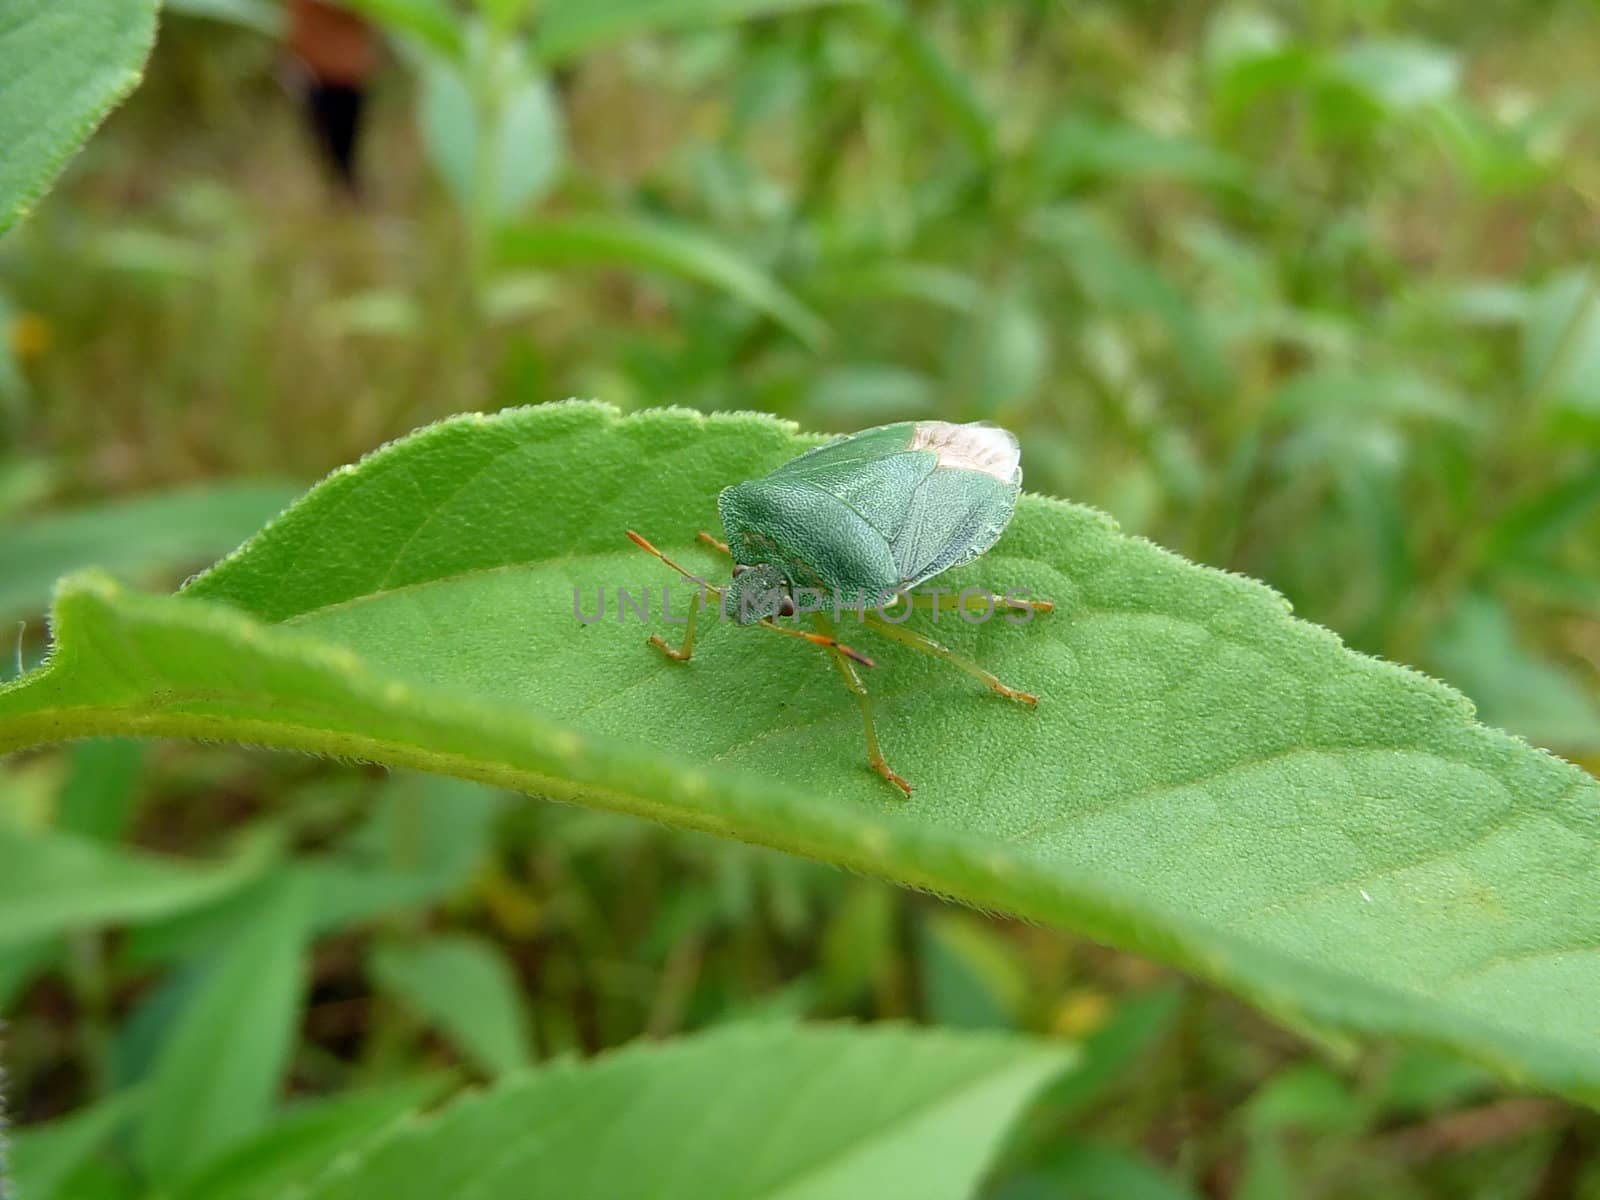 Usual green forest bug sits on the leaf